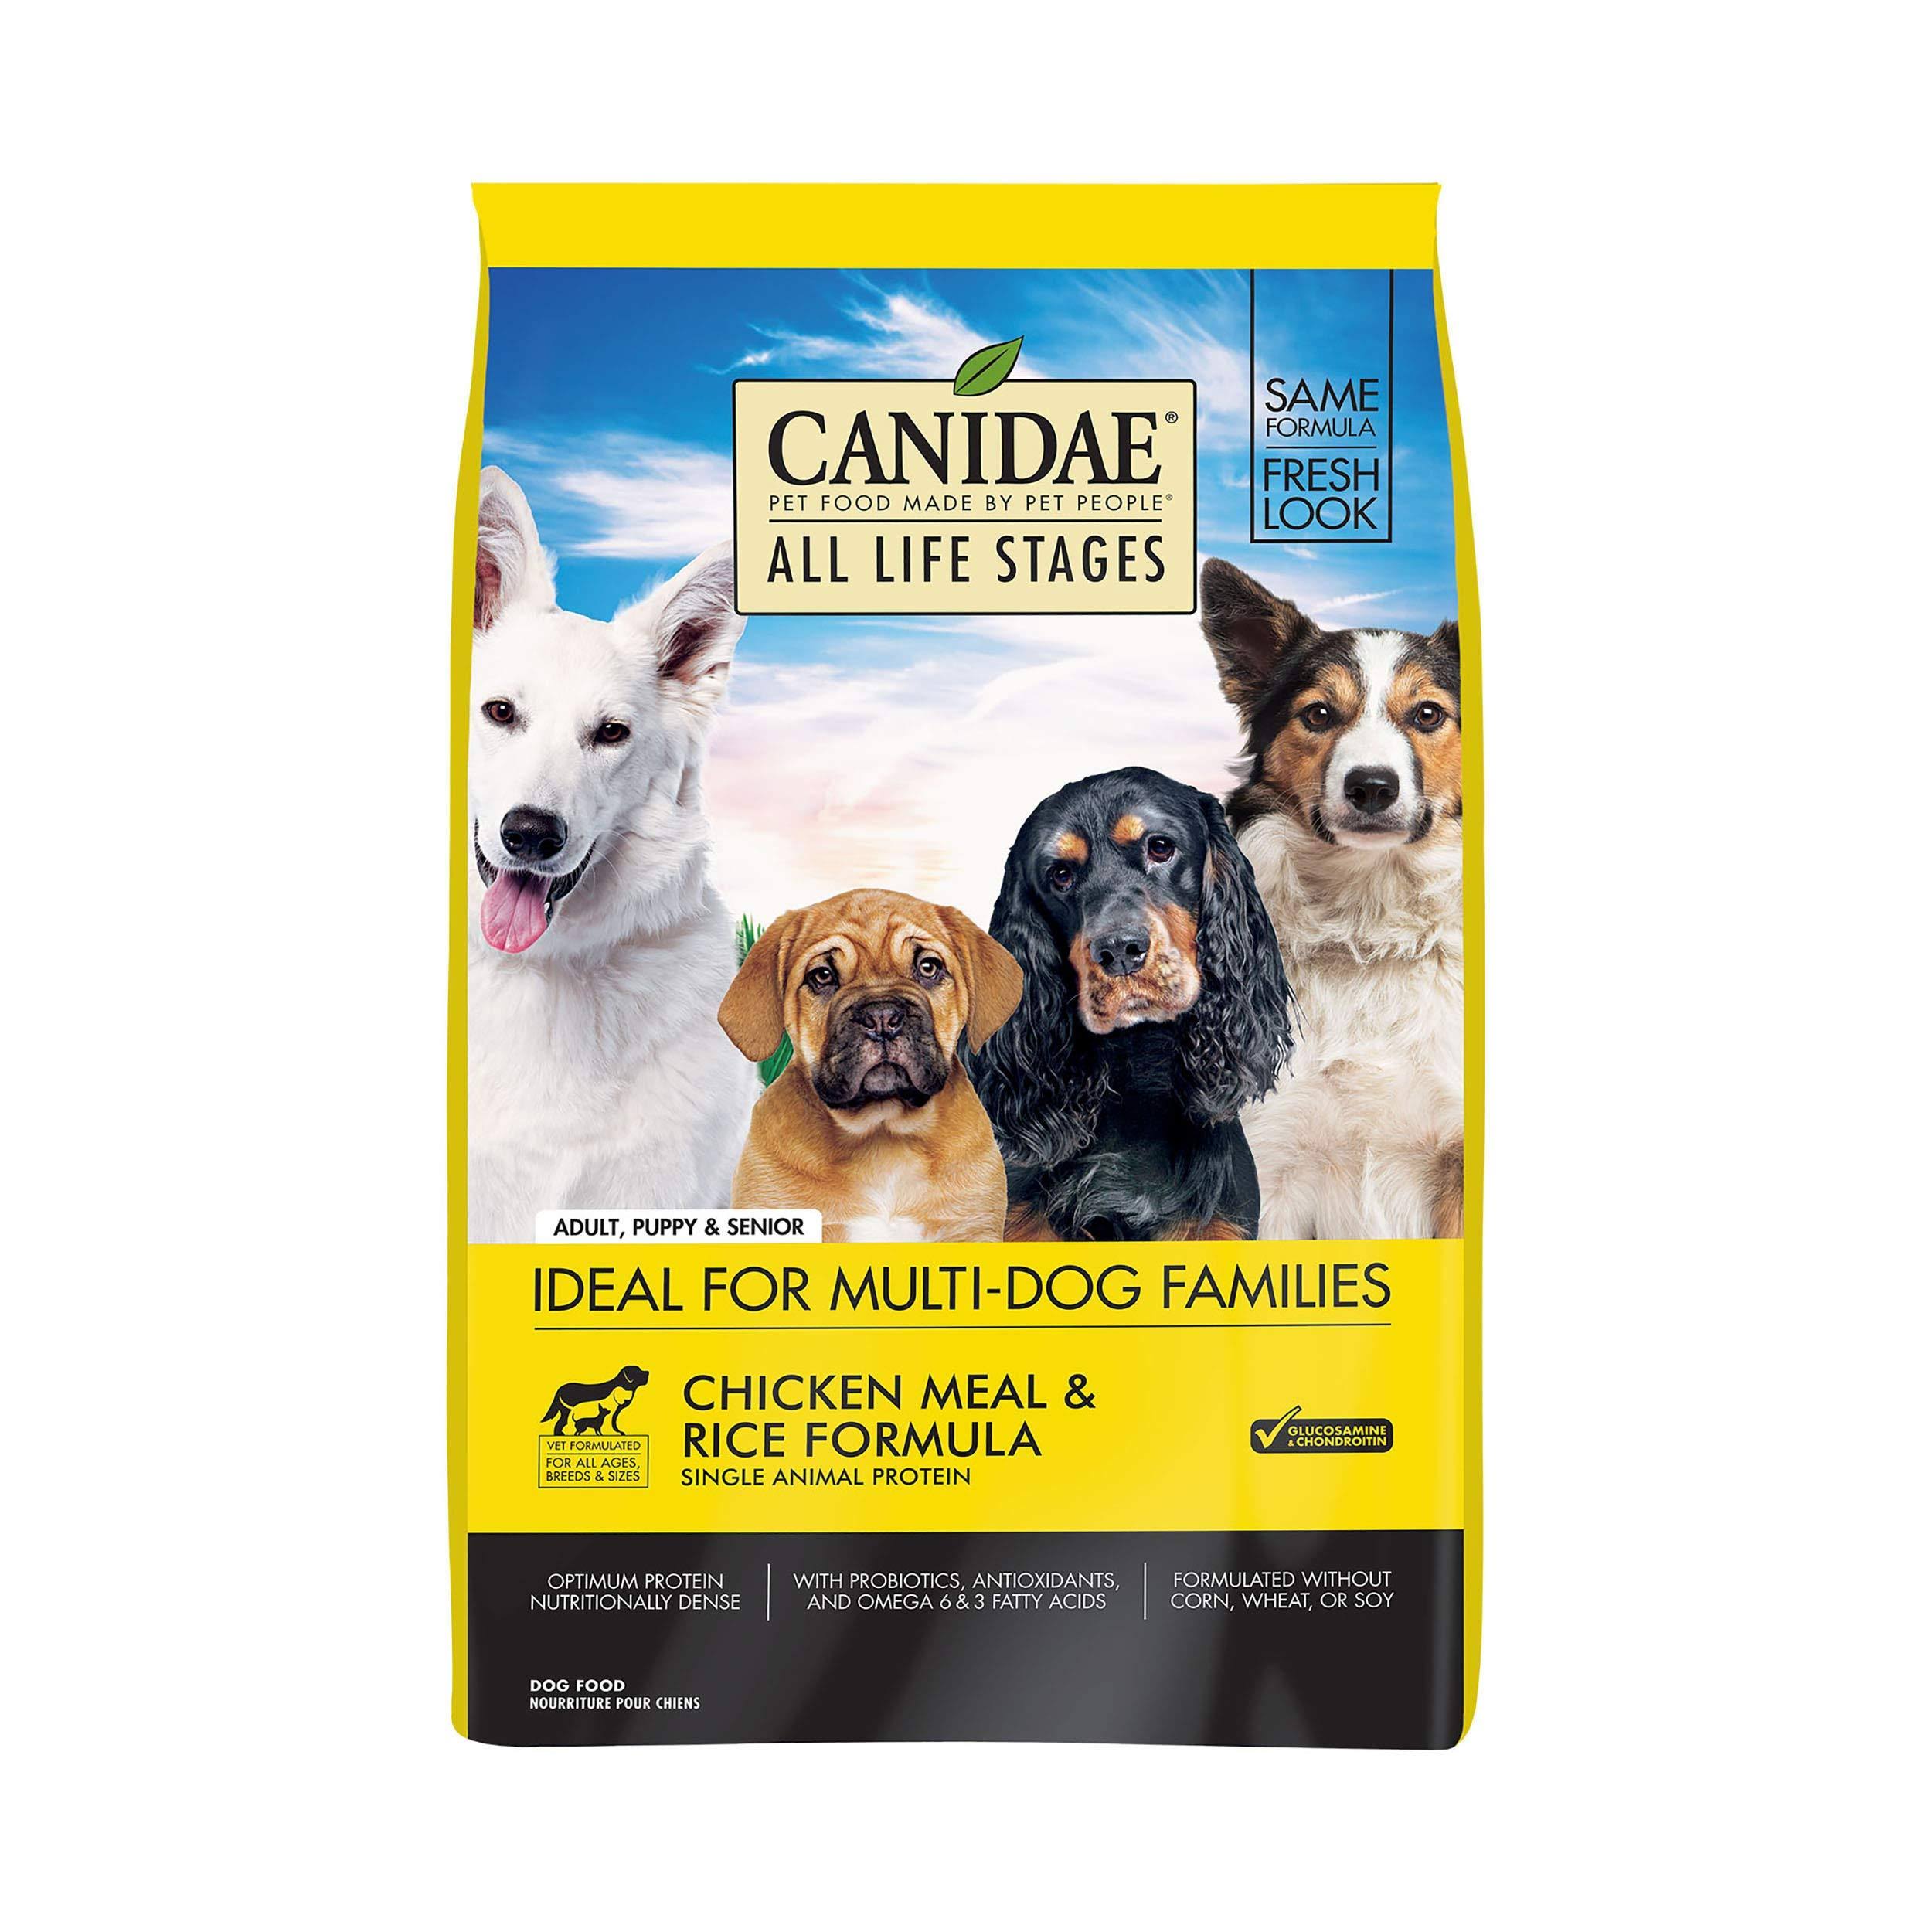 Canidae Dry Dog Food - Chicken Meal and Rice Formula, 5lbs